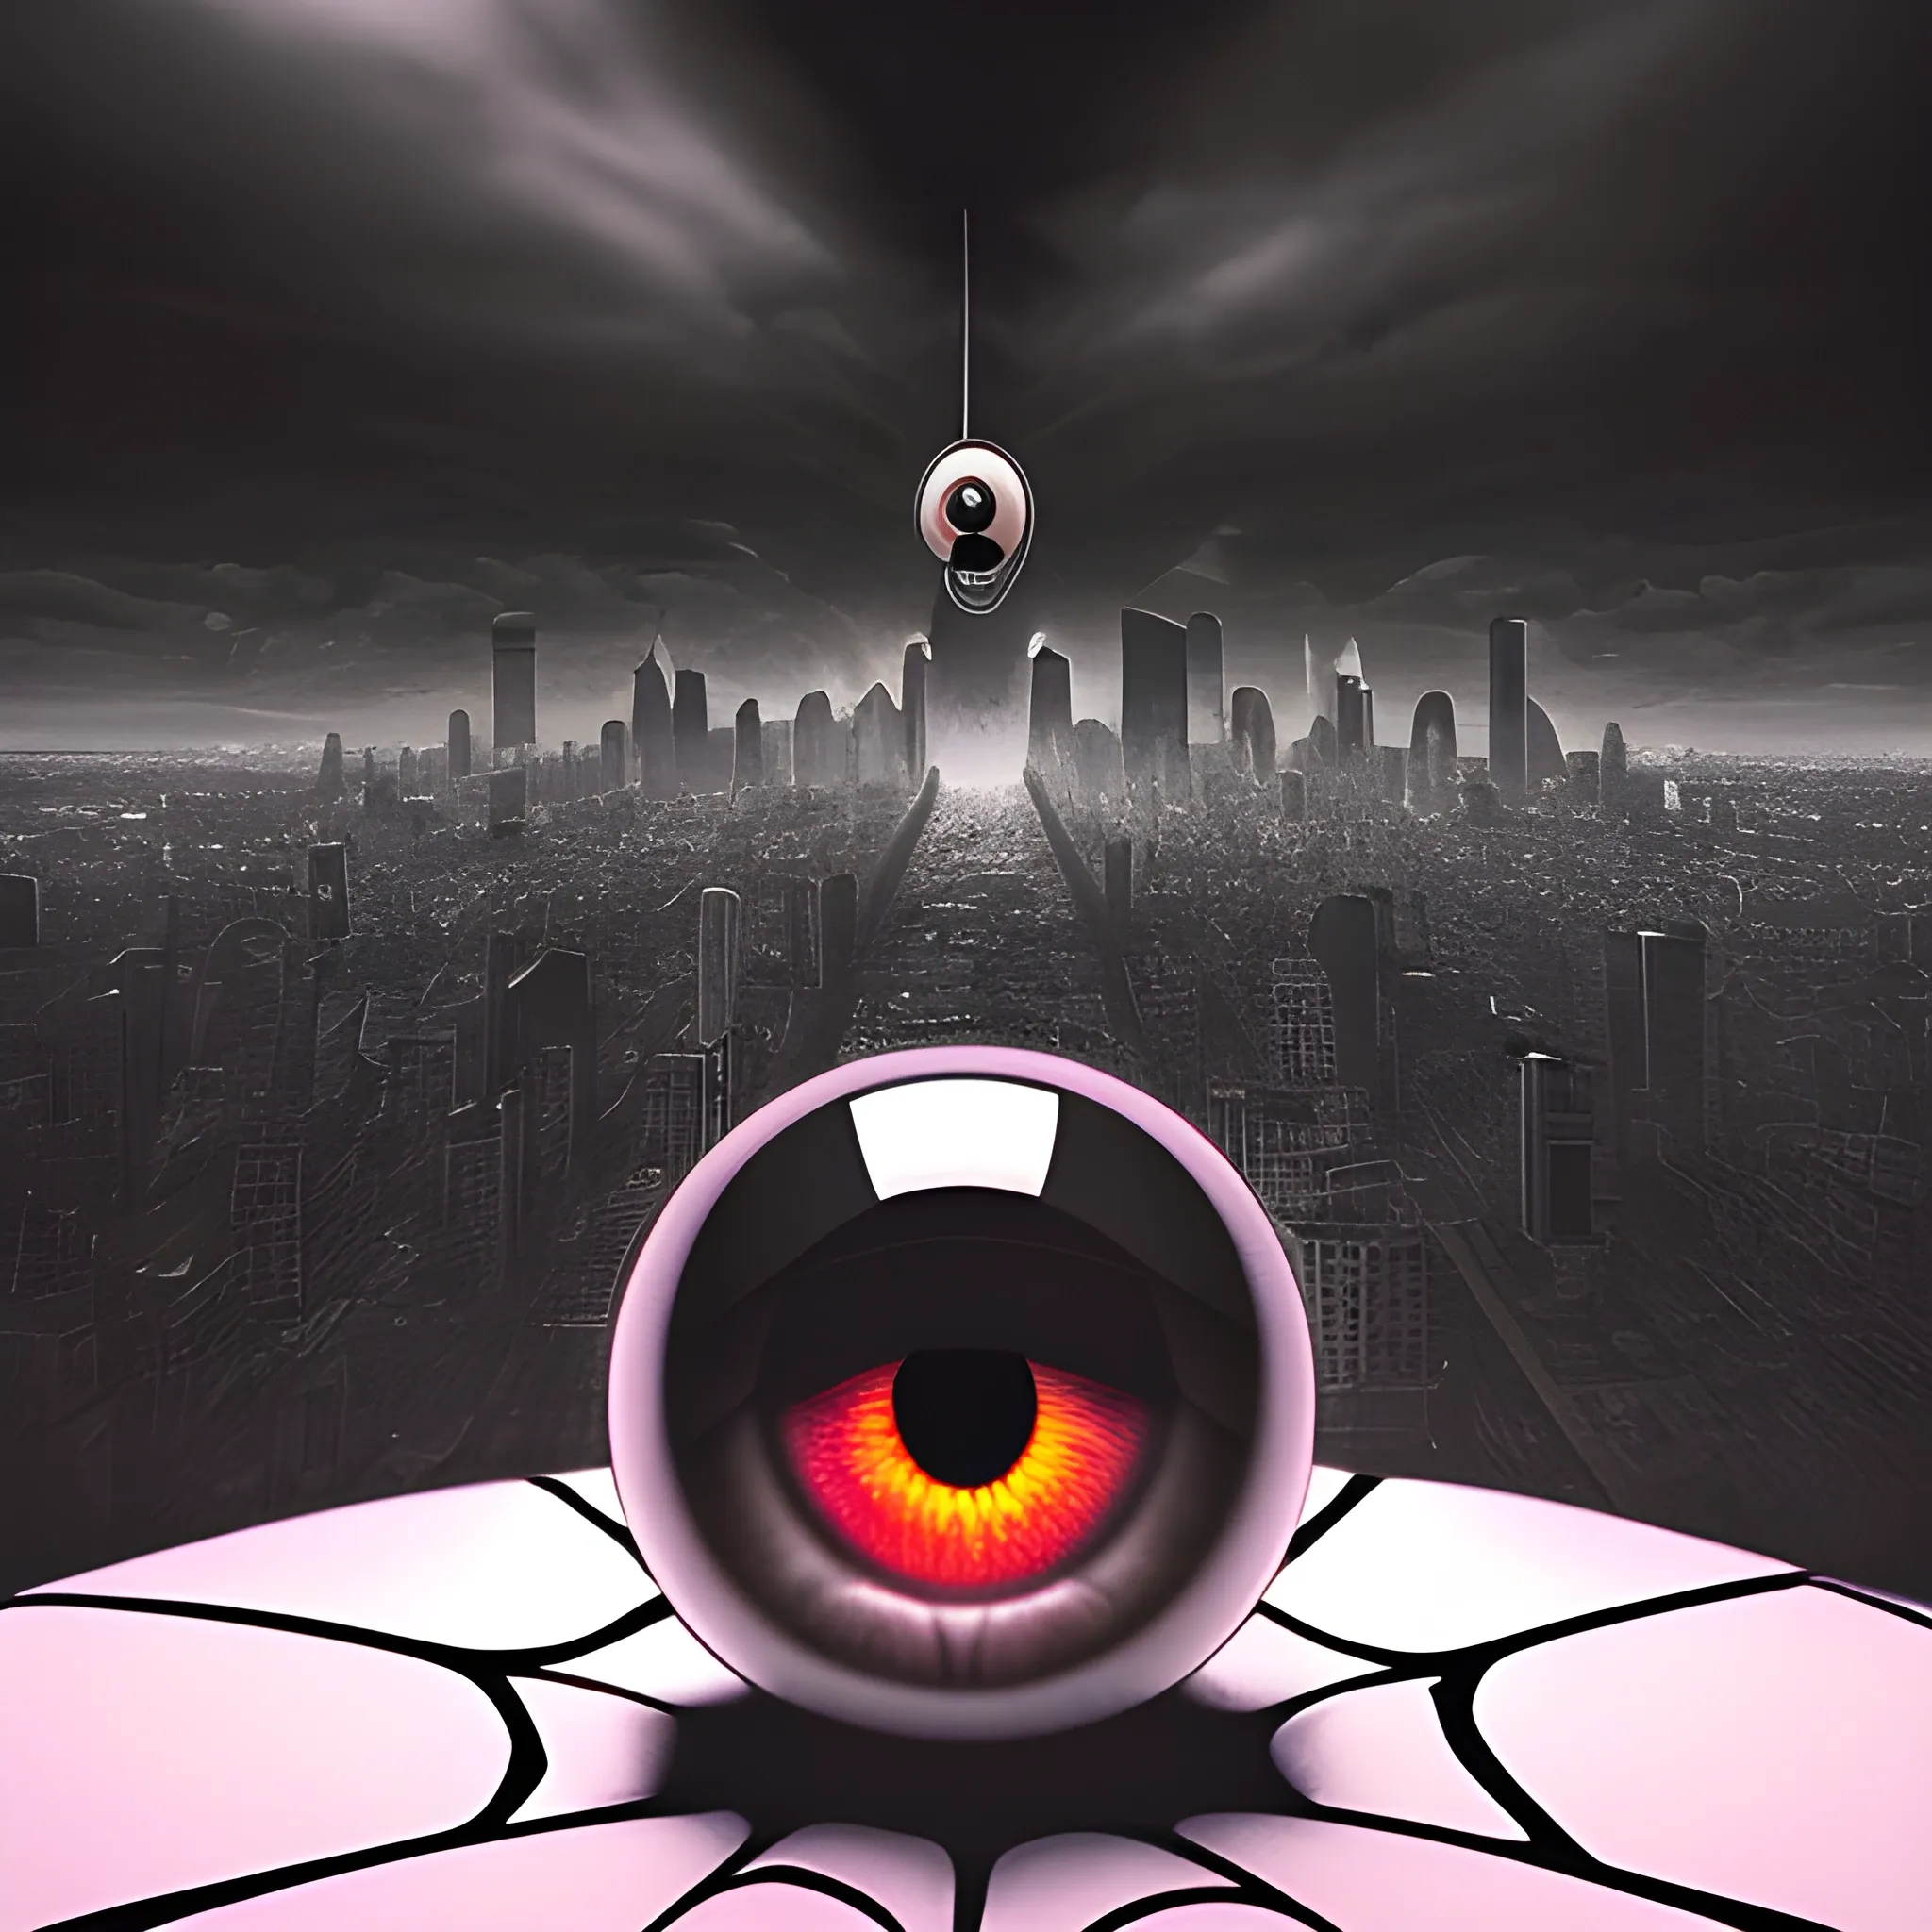 "rfktrstyle, A striking, high-quality close-up photograph featuring a spider atop a sinister, otherworldly eyeball. Set against the backdrop of a dystopian cityscape, the lighting imparts a moody and mysterious ambiance. The image is framed with precision using Kodak Ultra Max film, employing an 85mm lens for meticulous detail.

Captured using a combination of an iPhone 7 and DSLR technology, the photograph boasts impeccable quality, presenting a photorealistic and raw portrayal of this dark surrealist concept. Rendered in stunning 4K resolution, it immerses the viewer in a visual narrative that teeters on the edge of the bizarre and the uncanny. The spider's journey across the eerie eyeball becomes a captivating exploration of the surreal within an urban dystopia."